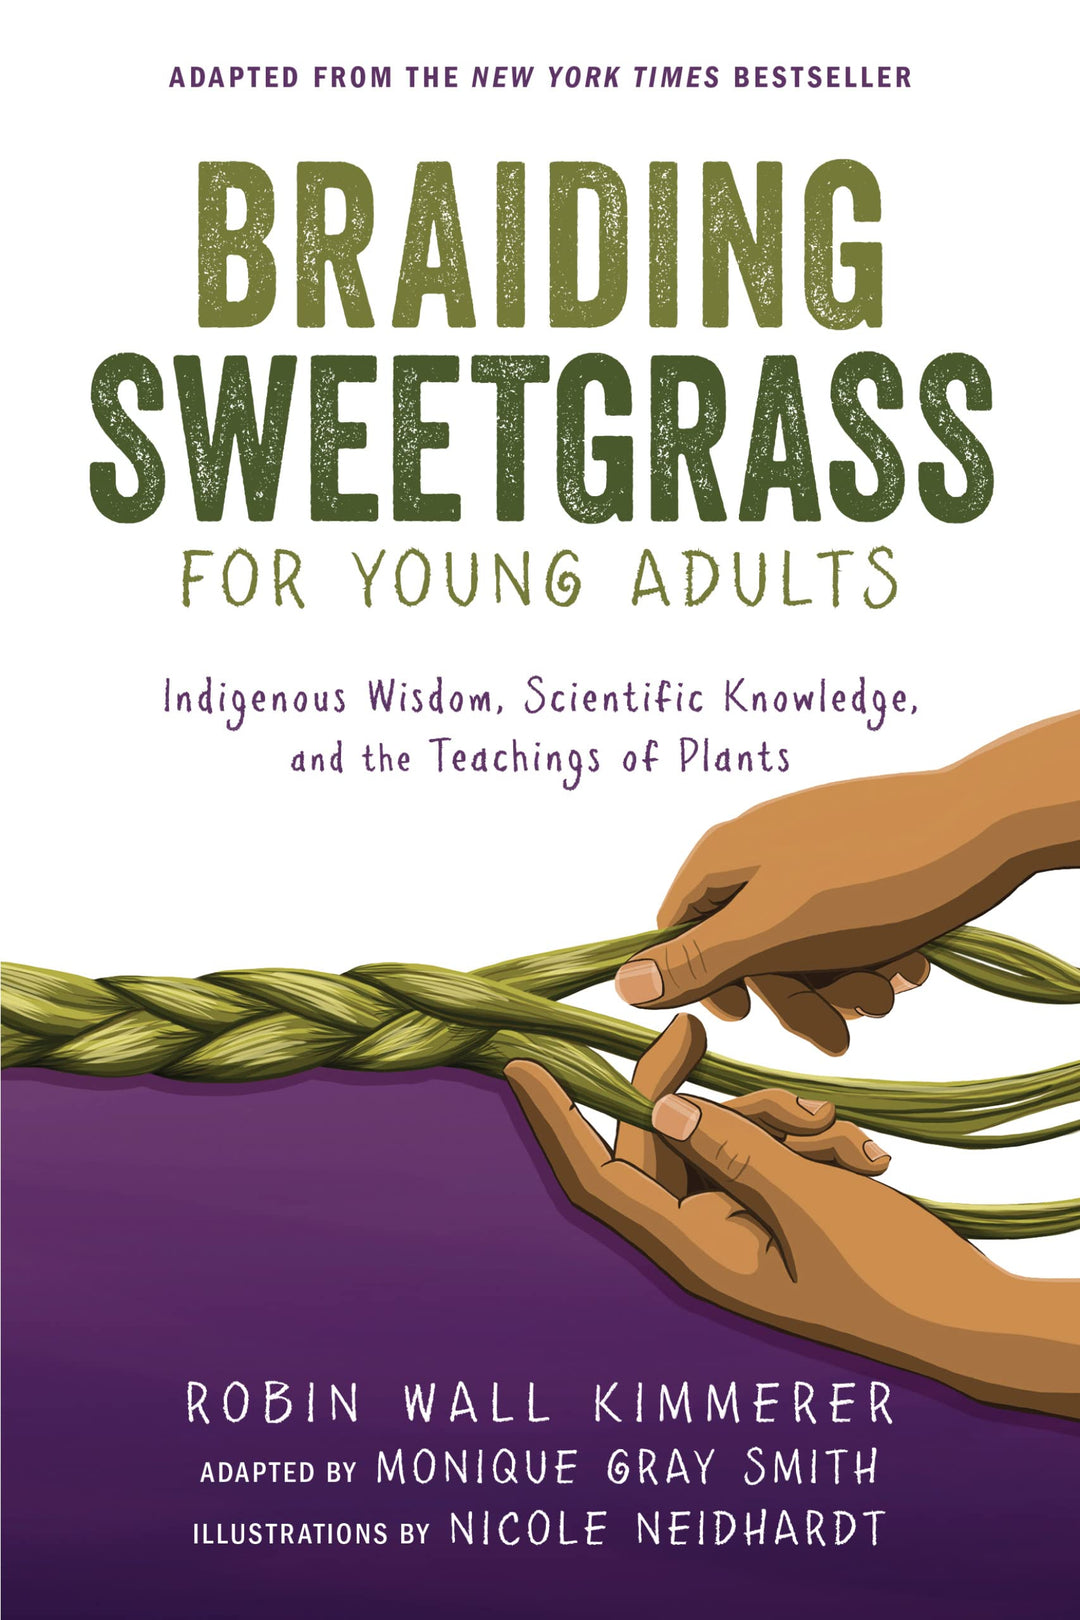 Braiding Sweetgrass for Young Adults: Indigenous Wisdom, Scientific Knowledge, and the Teachings of Plants by Robin Wall Kimmerer